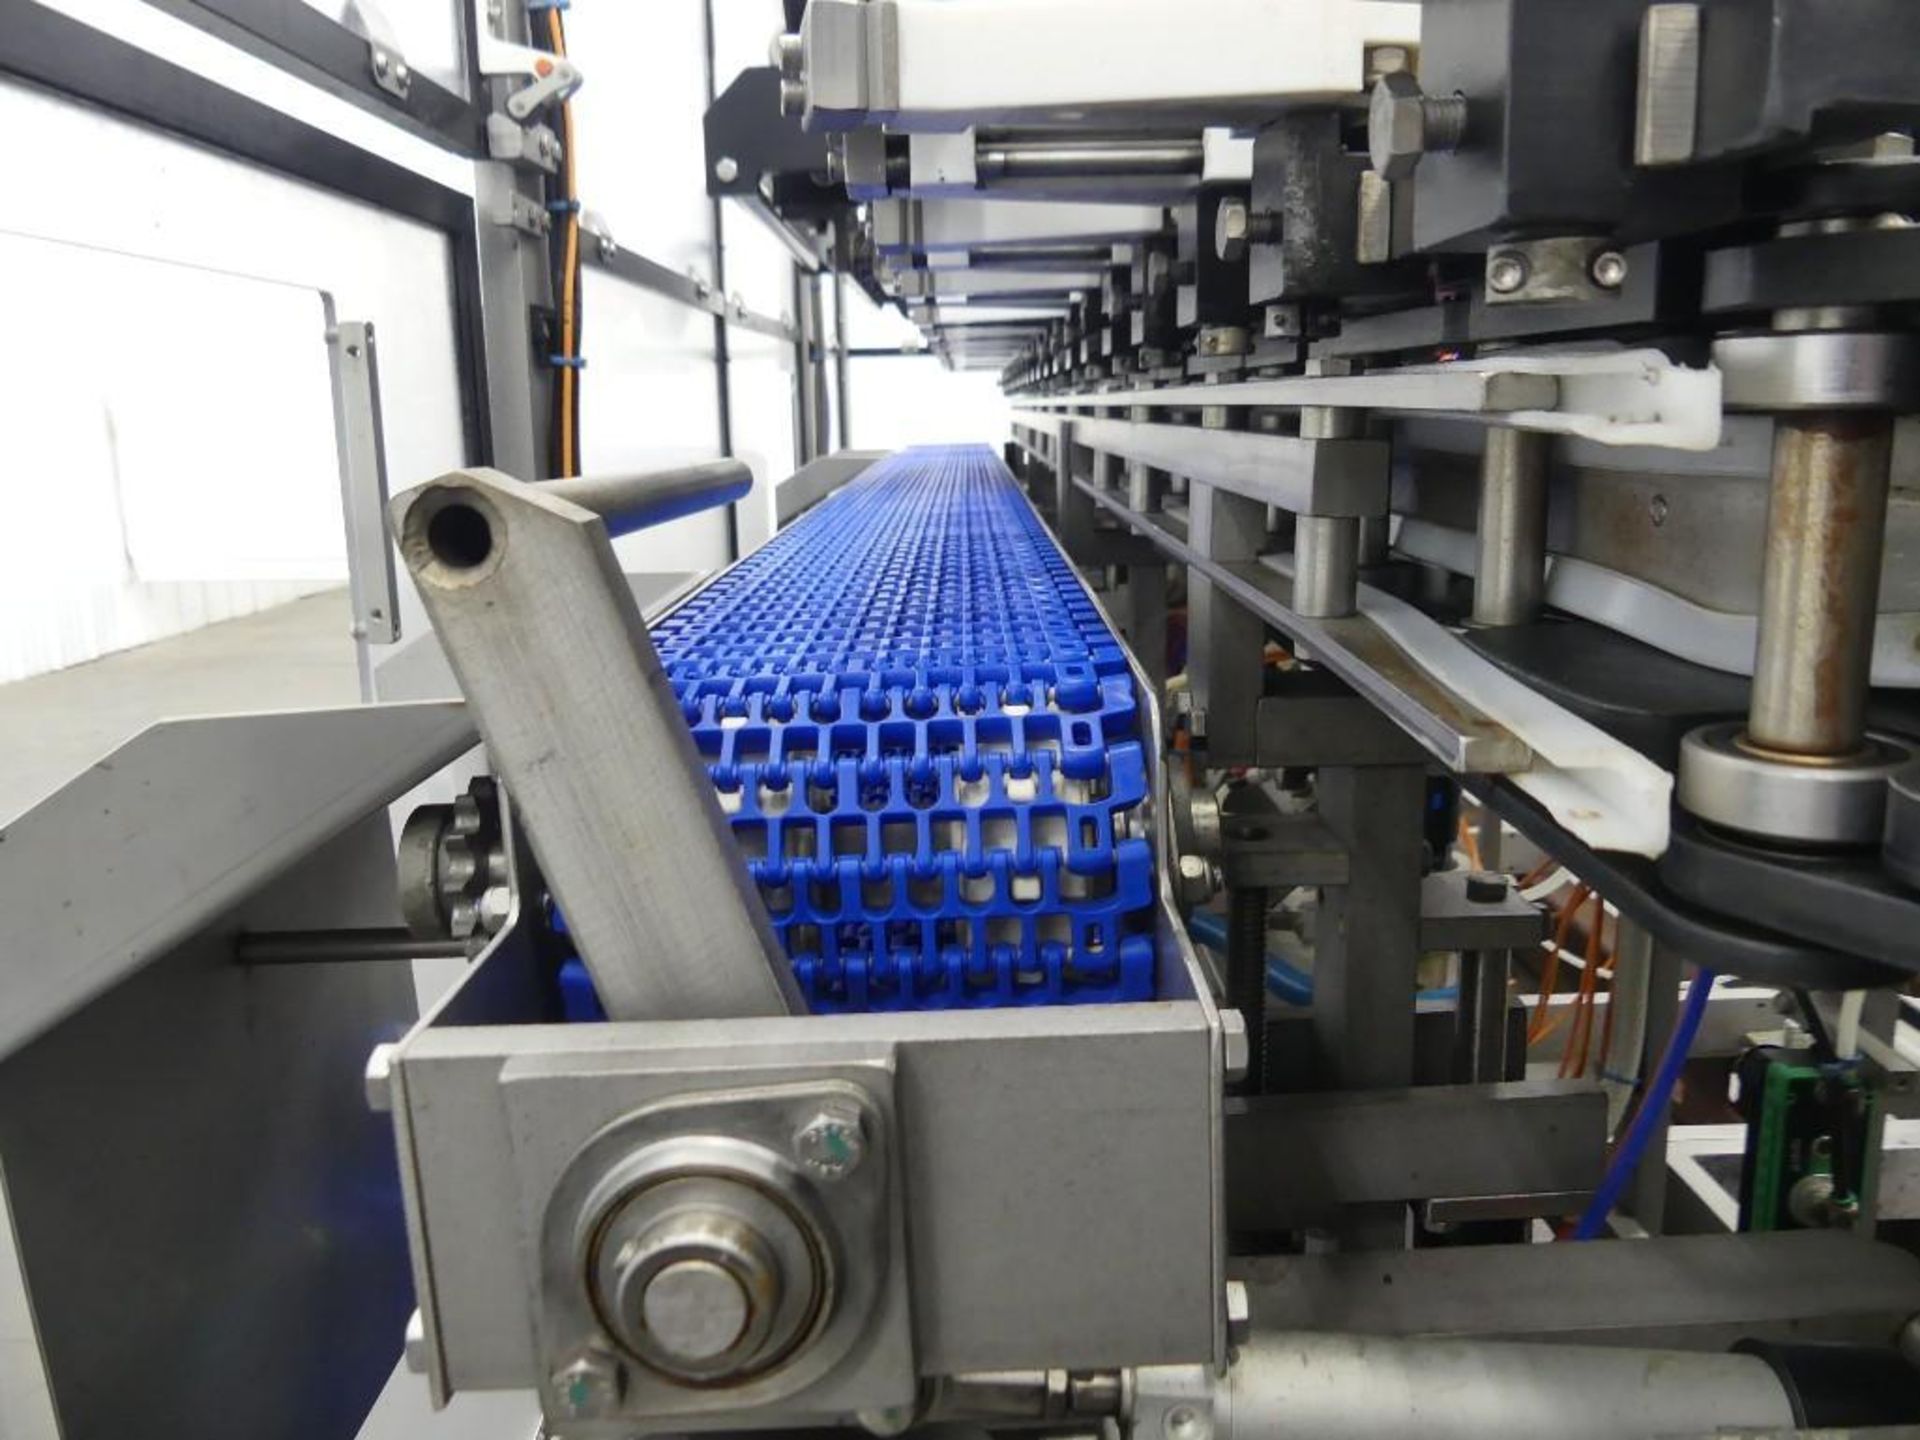 Massman HFFS-IM1000 Flexible Pouch Packaging System - Image 48 of 127